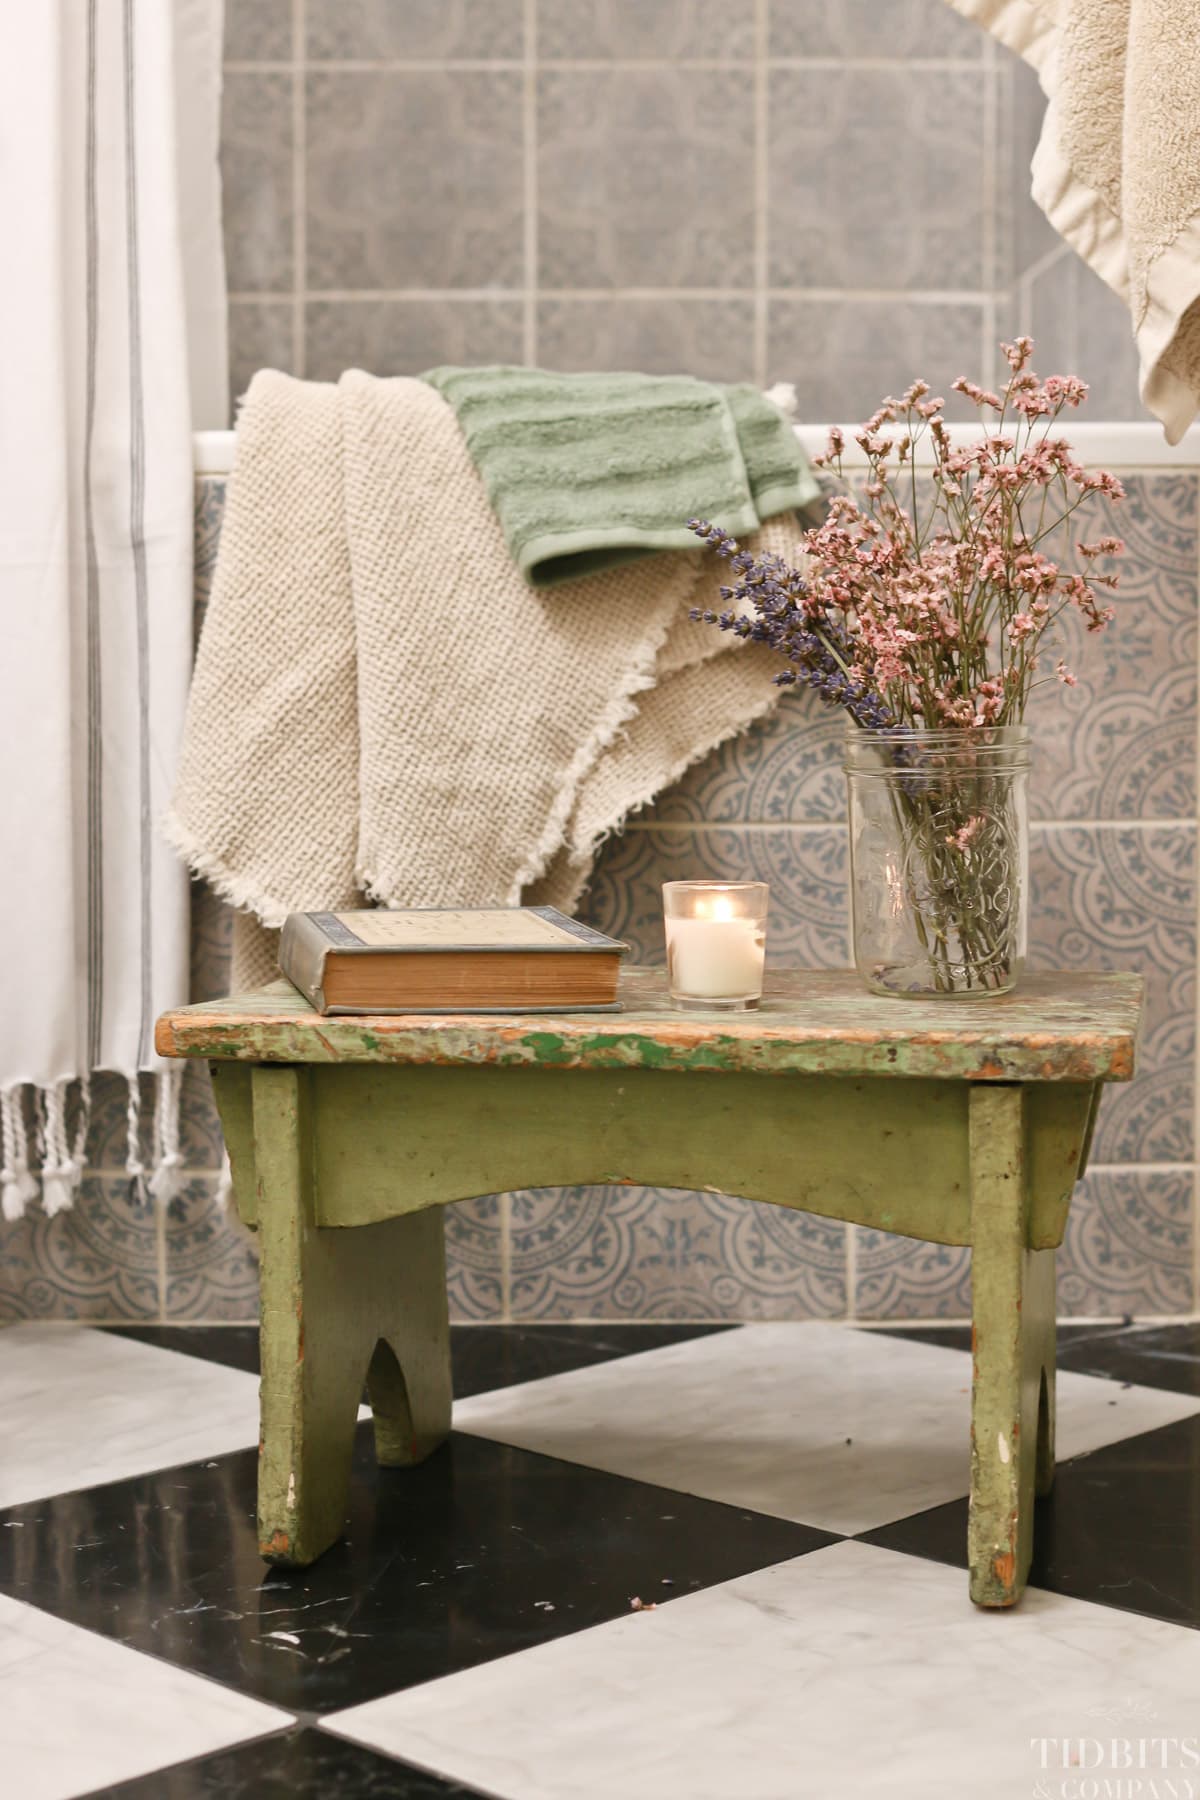 A green wooden bench holds a book, candle and flowers in a small split bathroom